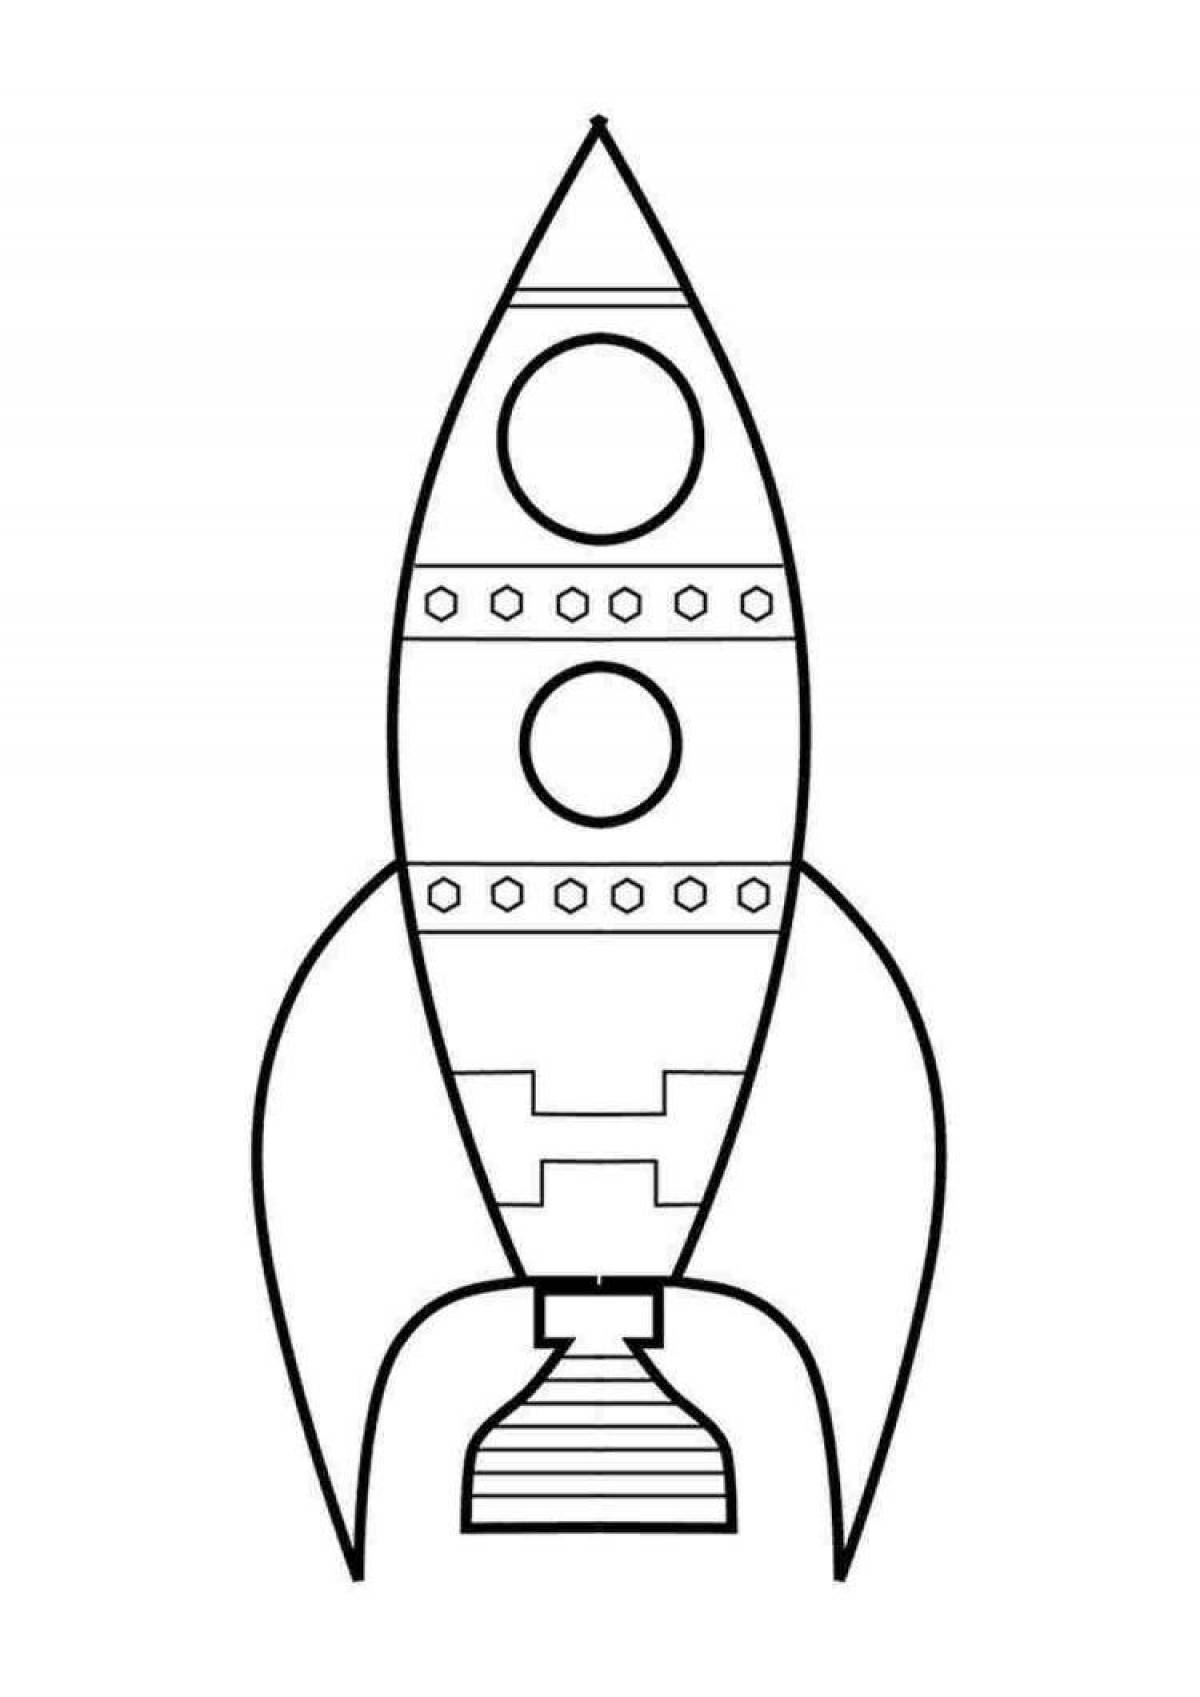 Amazing rocket drawing for kids